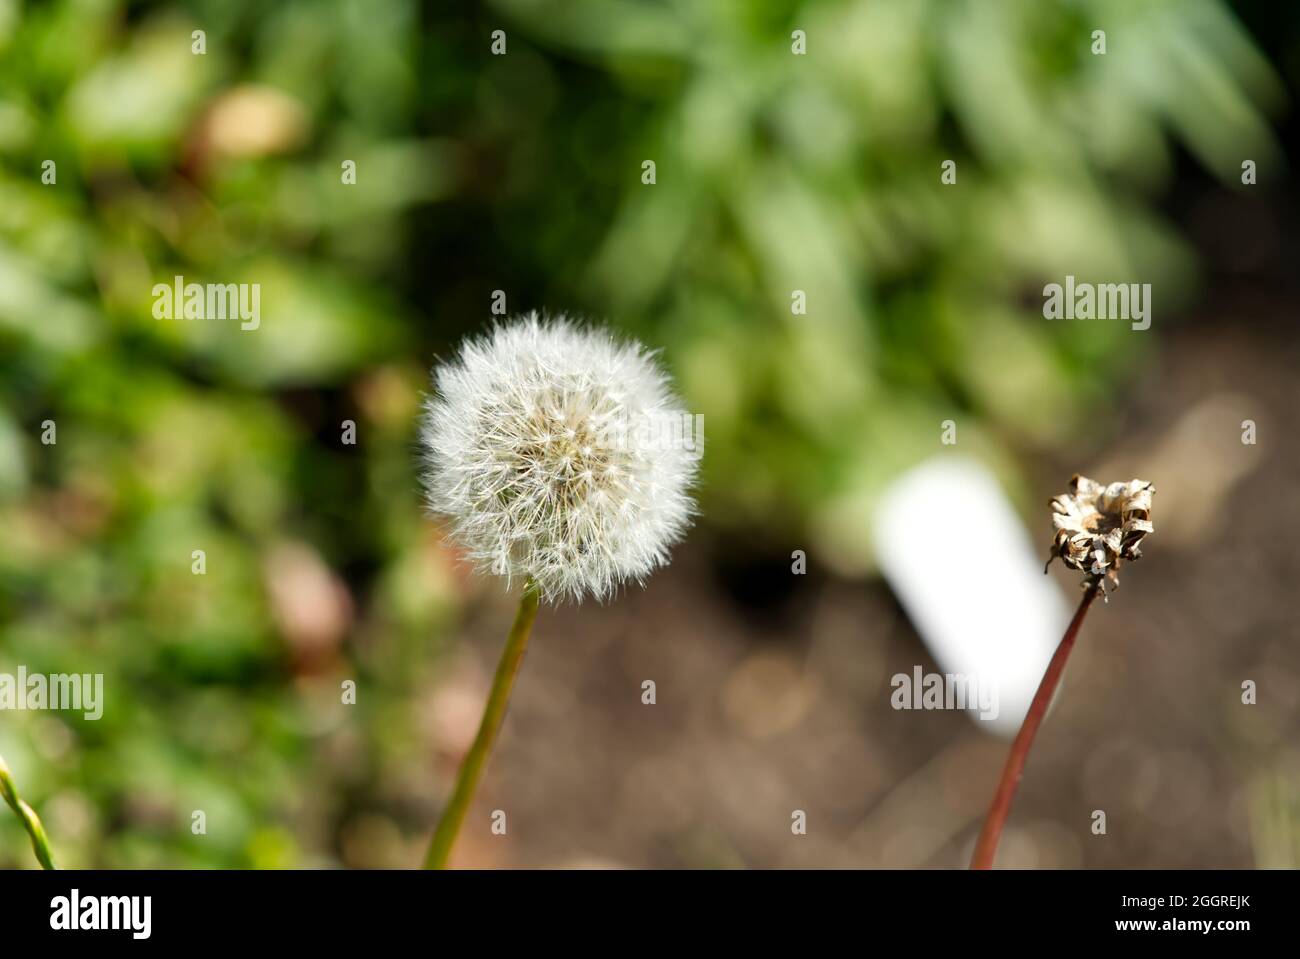 white fluffy dandelion Taraxacum officinale on a green and brown blurred background. Stock Photo